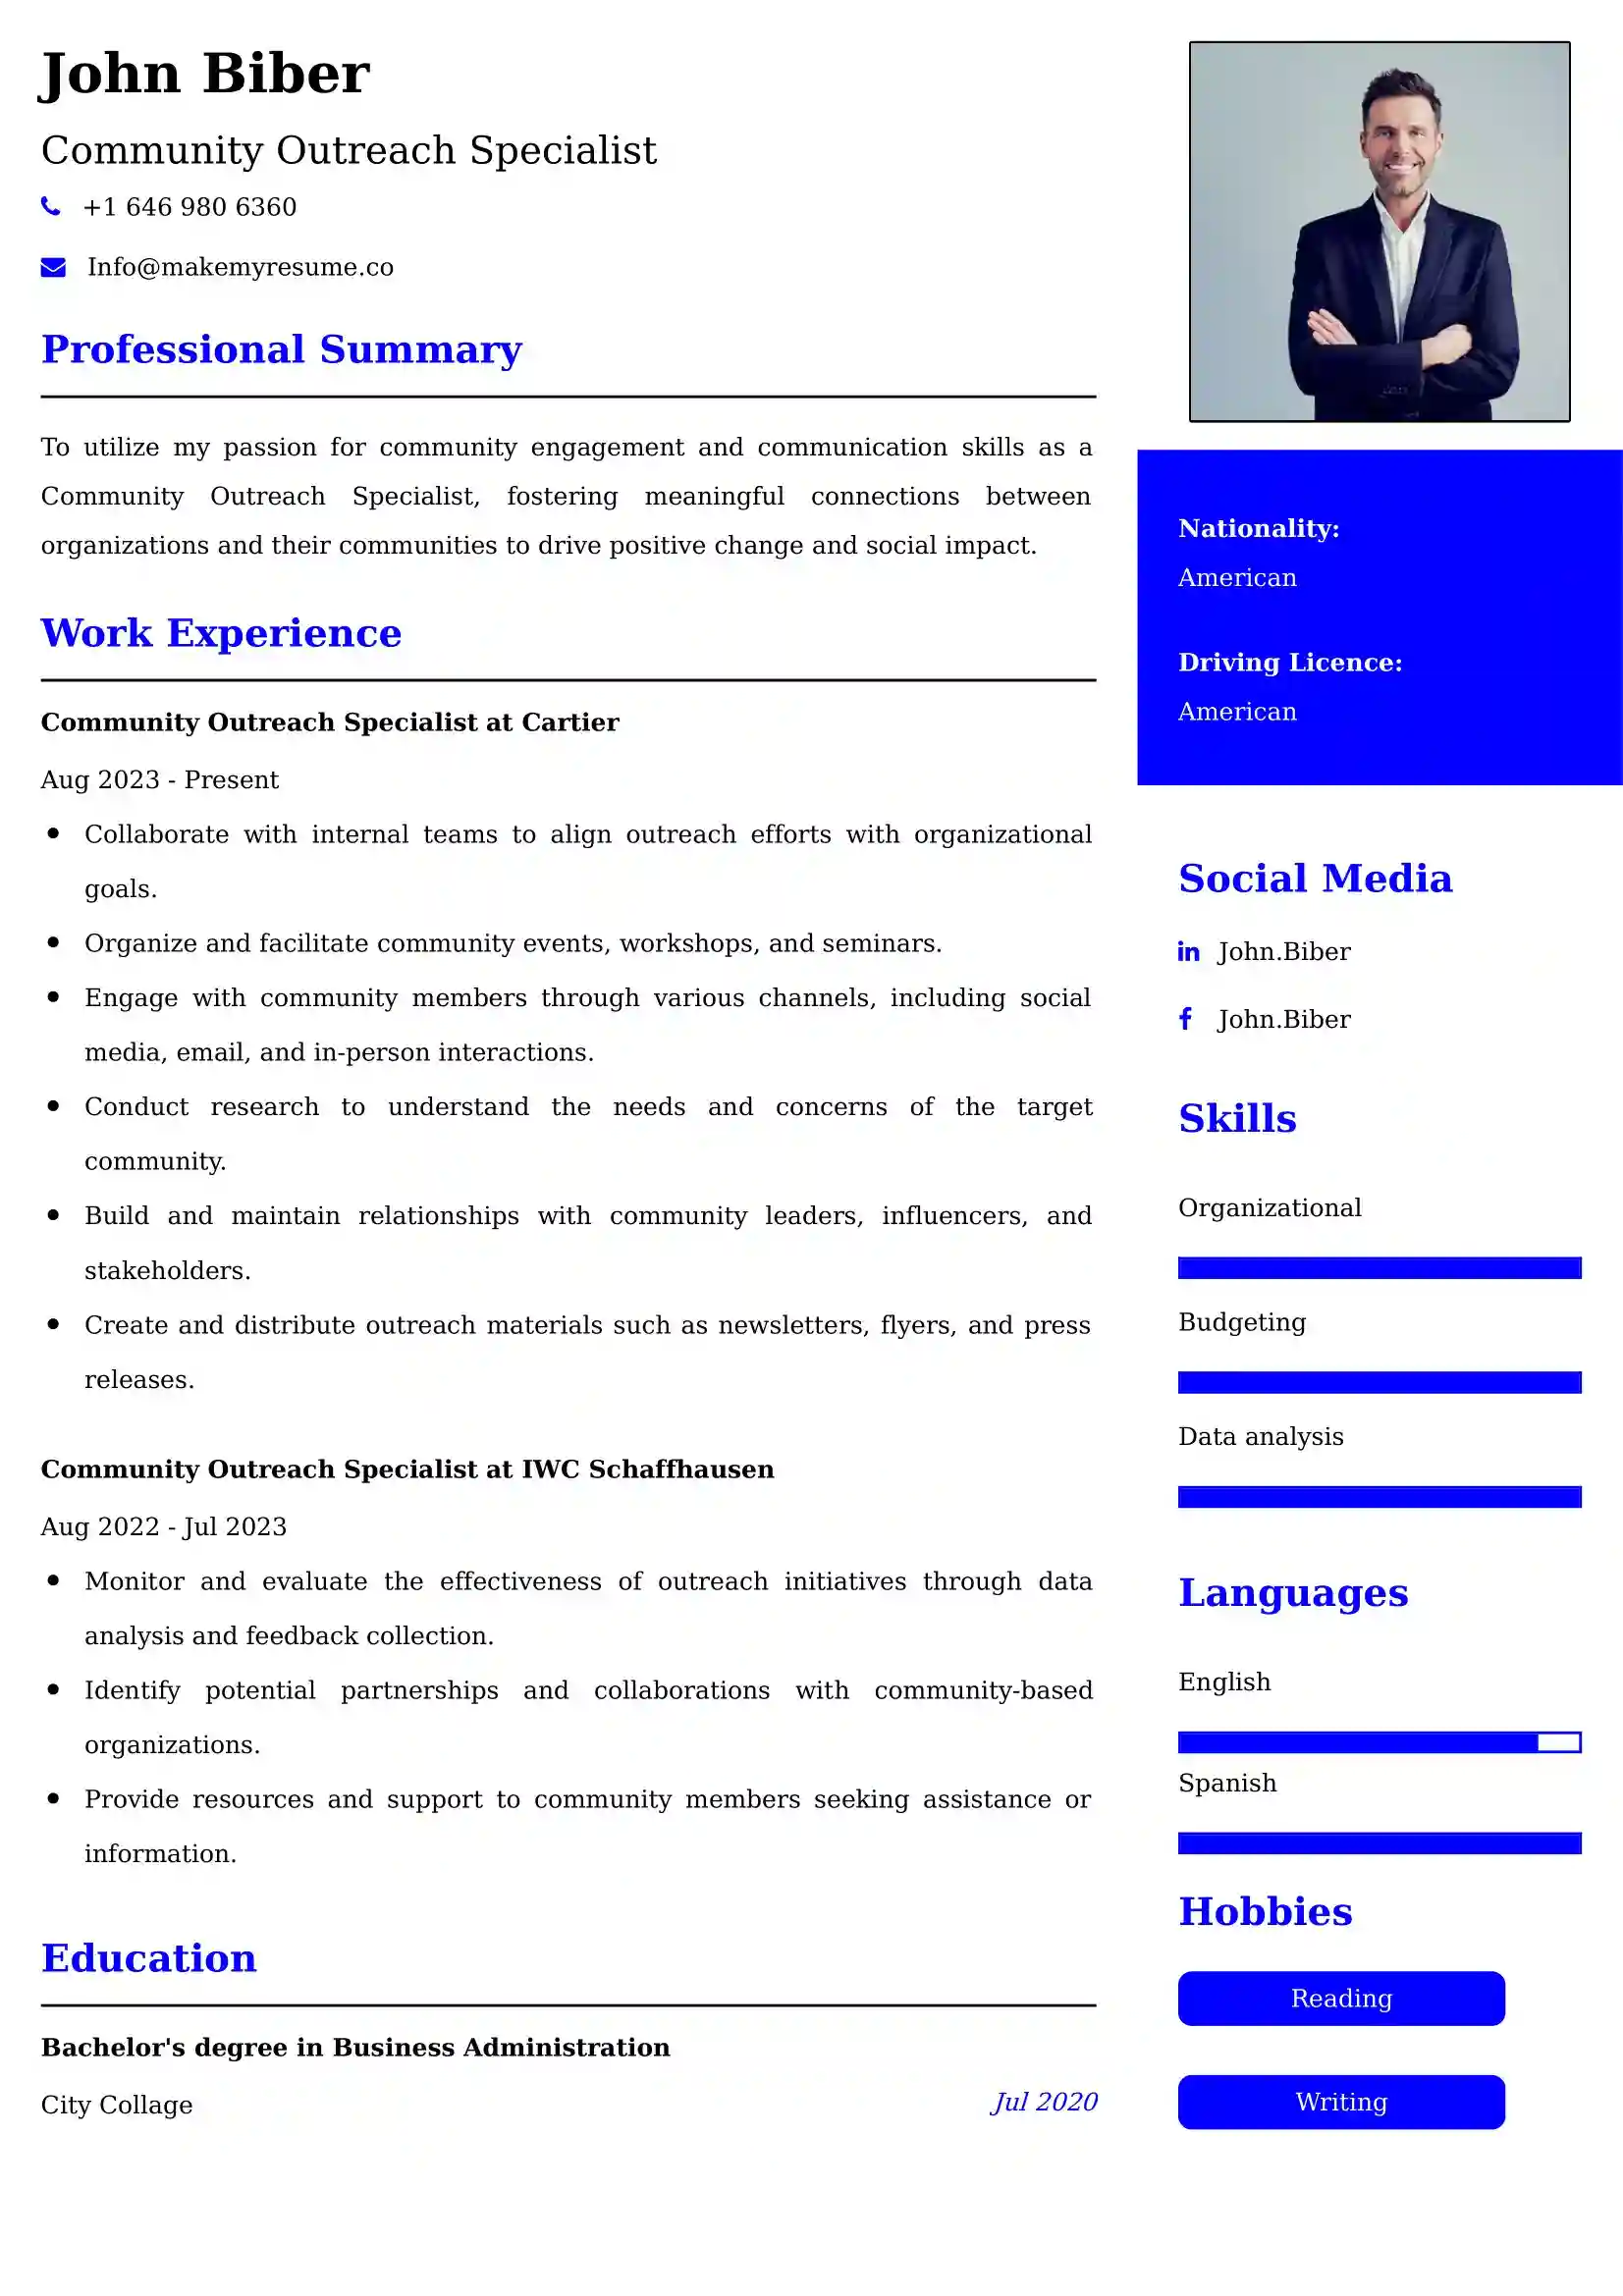 Community Outreach Specialist Resume Examples - Brazilian Format, Latest Template